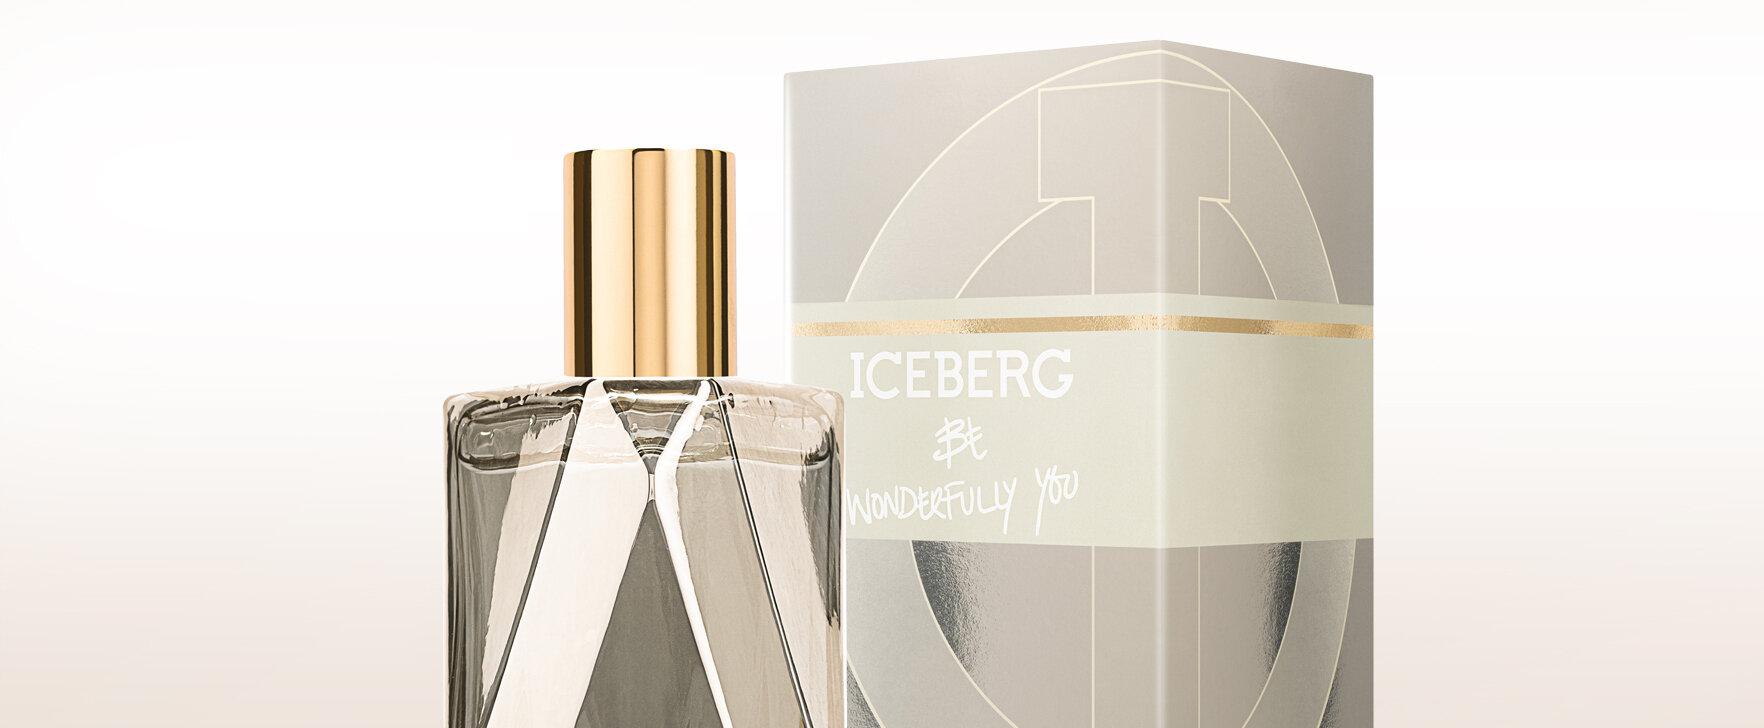 An Ode To Unconventional Beauty: The New Eau de Toilette "Be Wonderfully You" by Iceberg